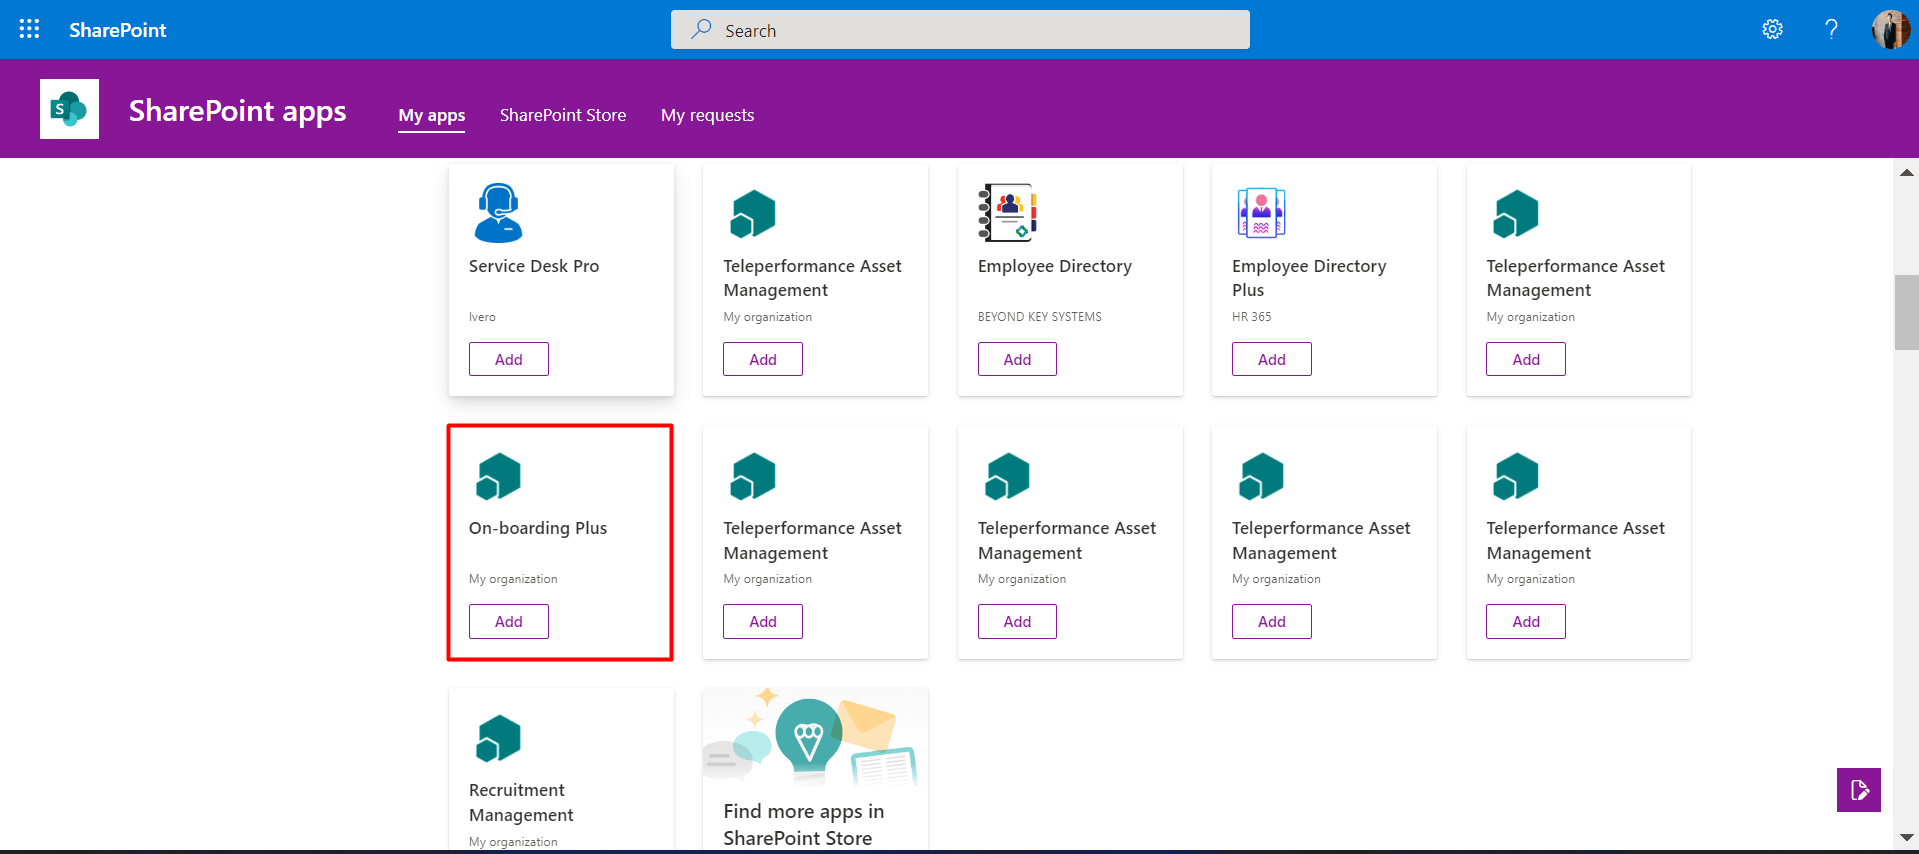 SharePoint apps